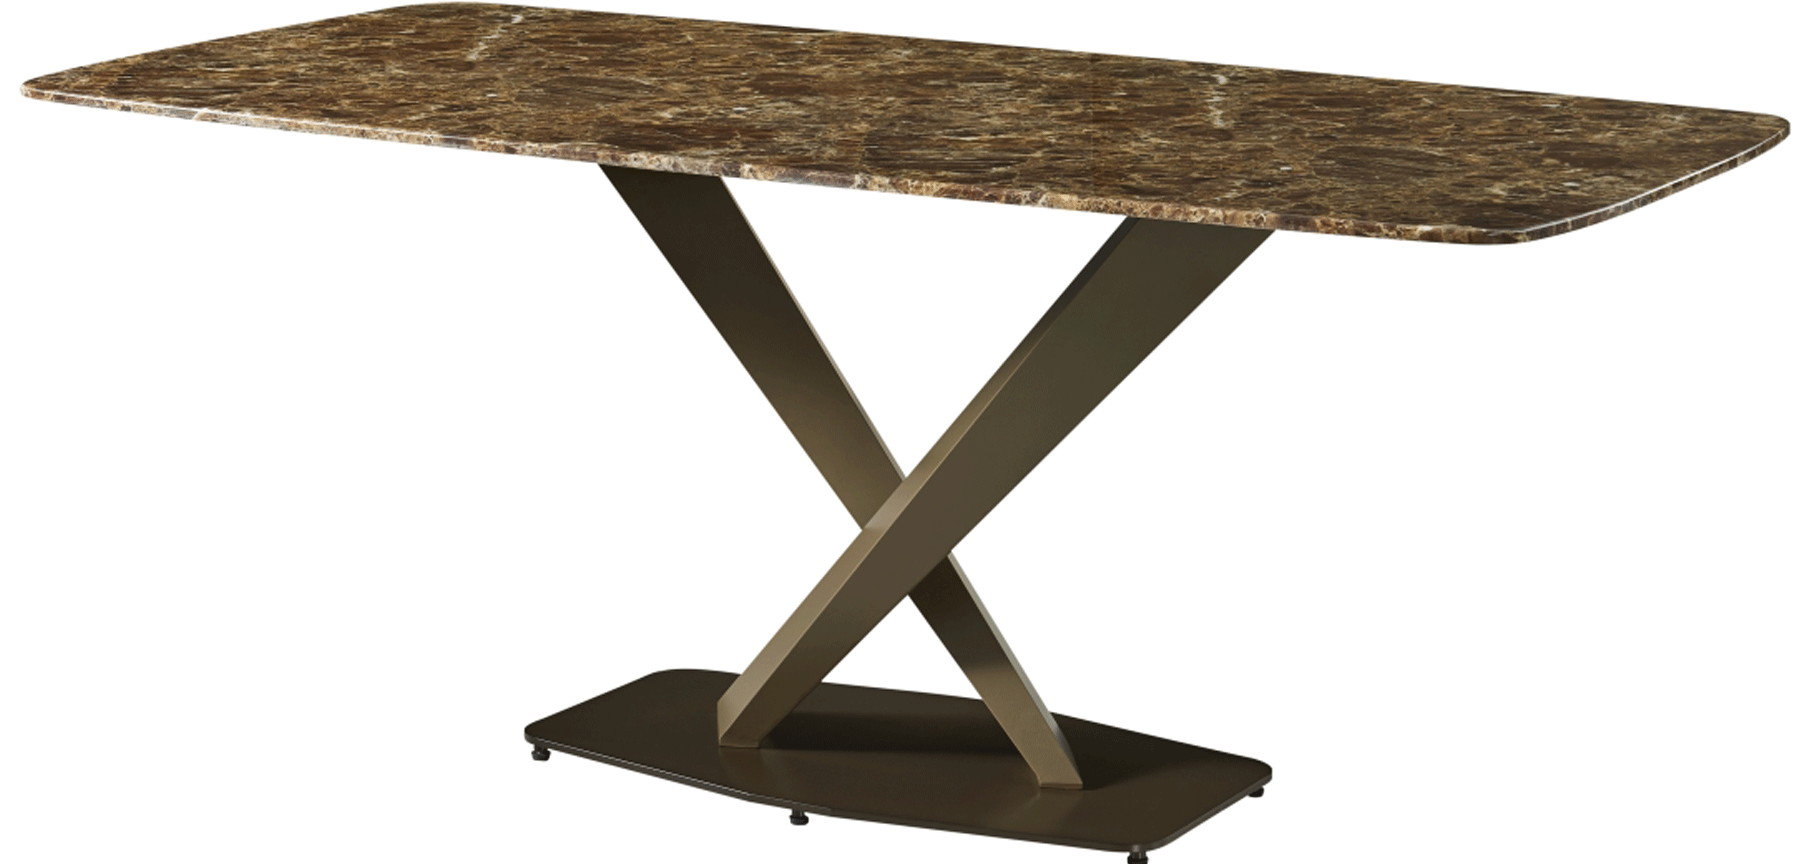 Brands Fama Modern Living Room, Spain 311 Marble Dining Table